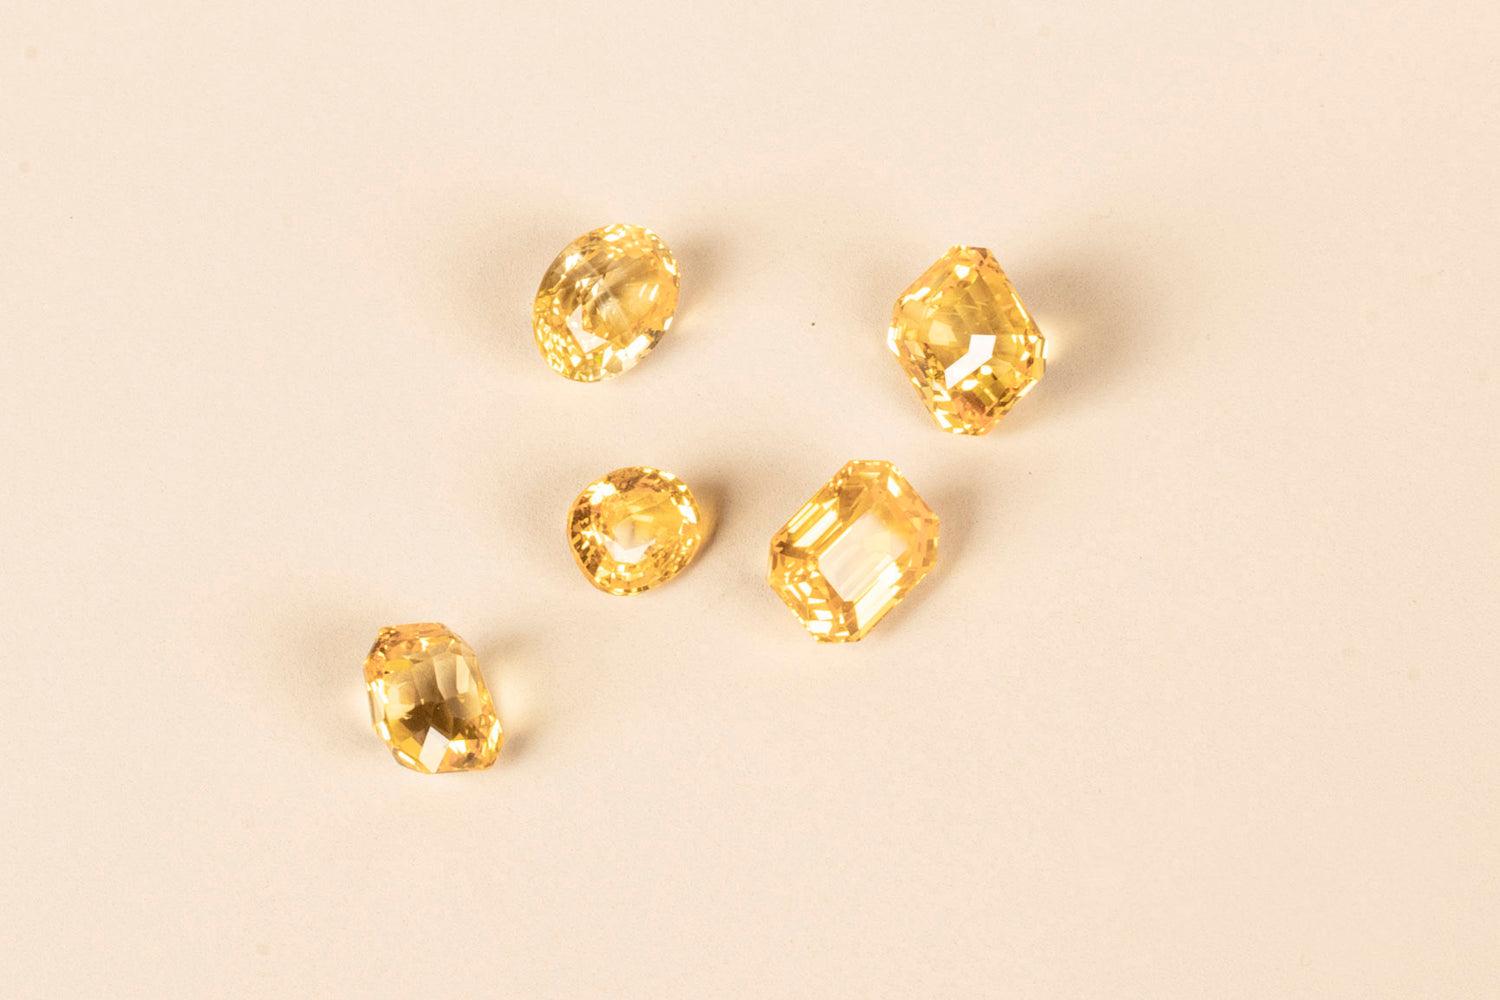 Cut & Polished Yellow Sapphires